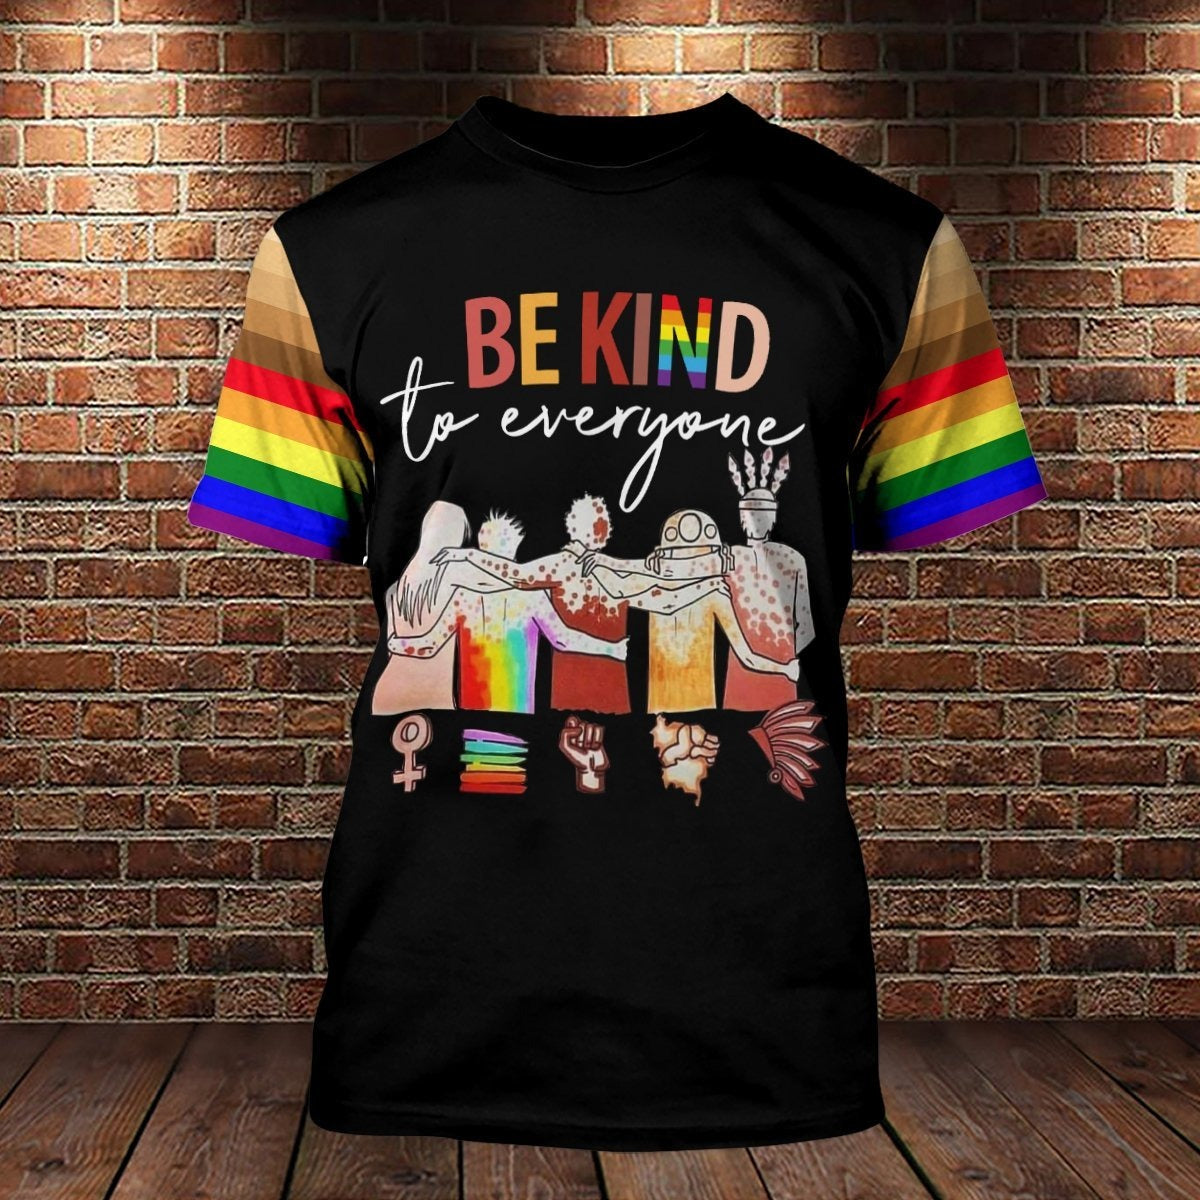 Lgbt Be Kind To Everyone 3D All Over Printed Shirts For Gay And Lesbian/ Gift For Lgbt Pride Month